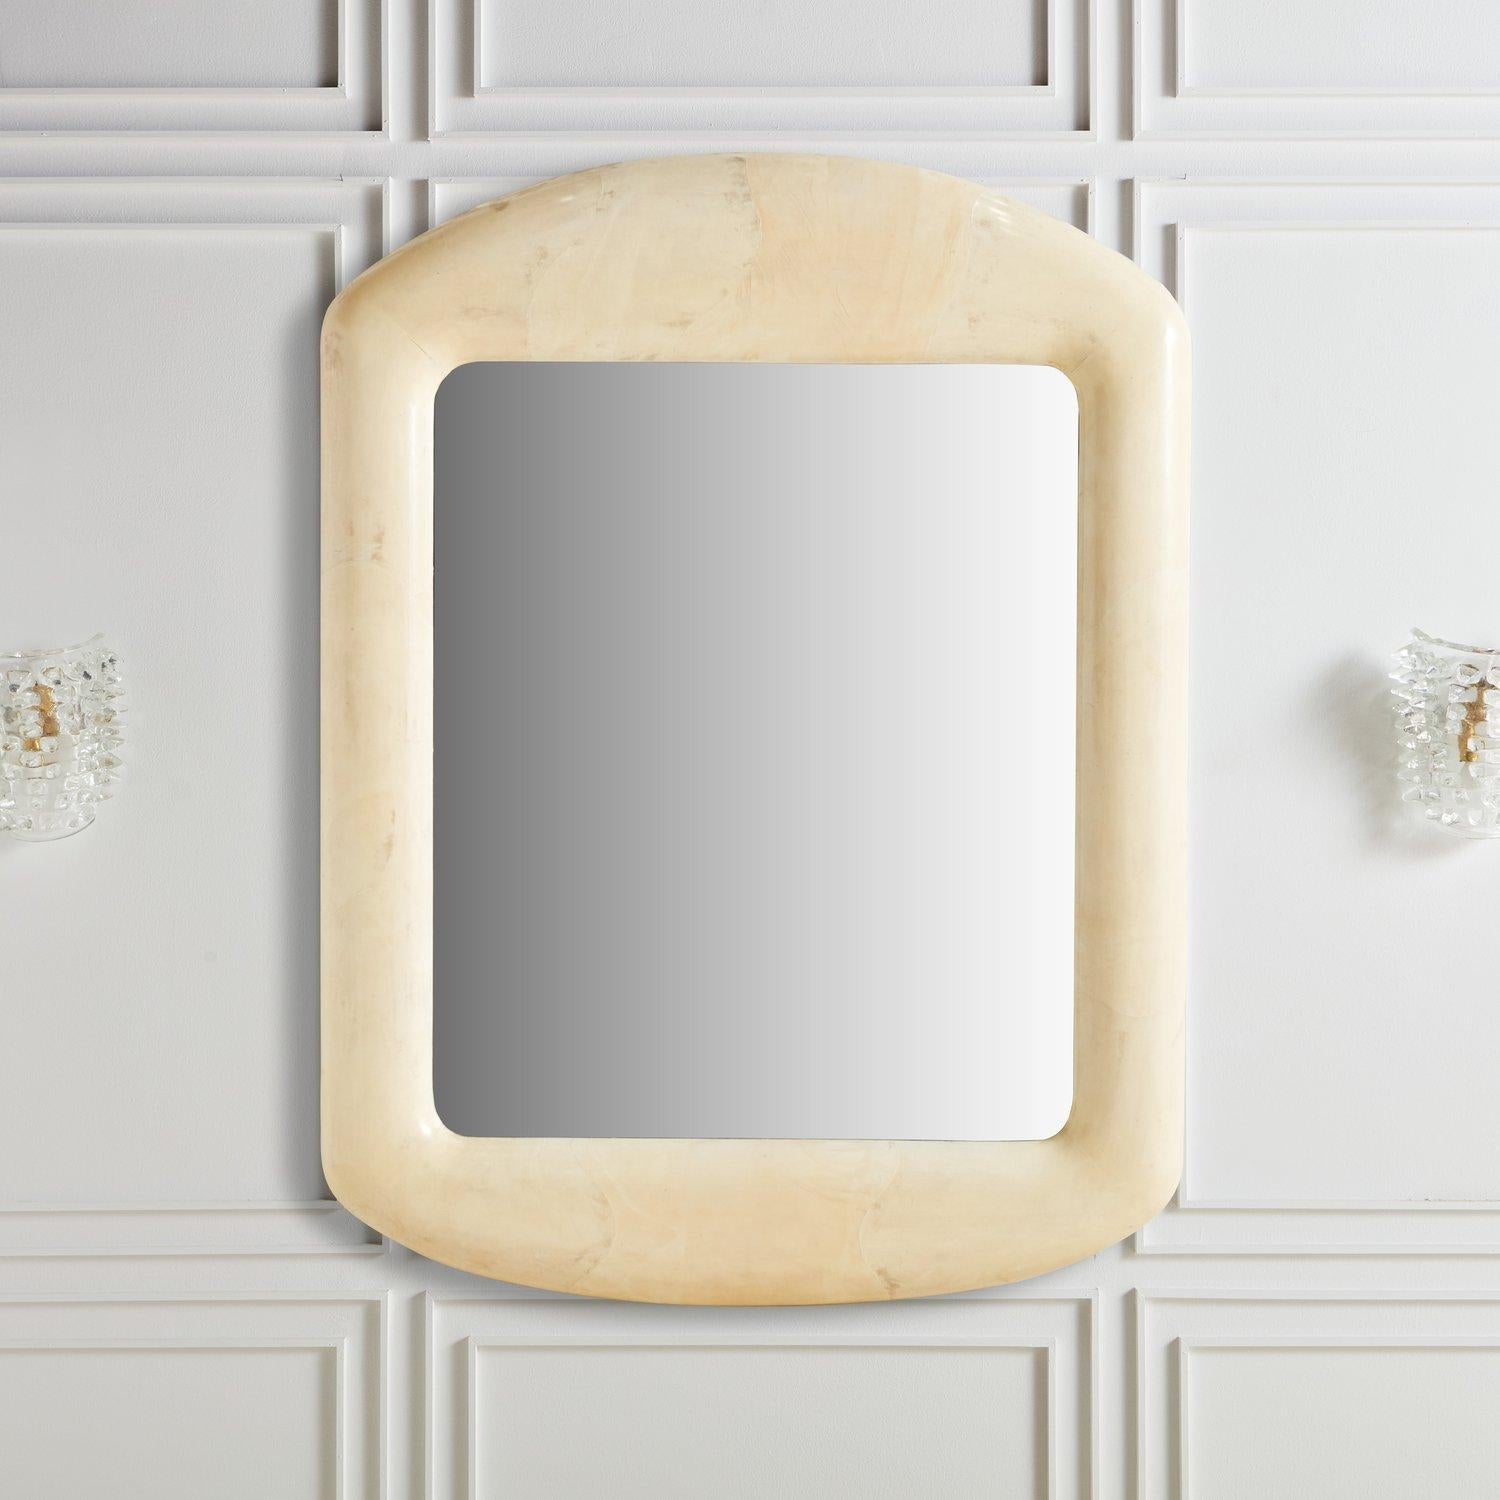 A stunning monumental rectangular wall mirror featuring a thick dome frame constructed with wood clad in goatskin and protected under a lacquer finish. The goatskin is a beautiful cream hue with subtle color variations. The scale of this mirror is